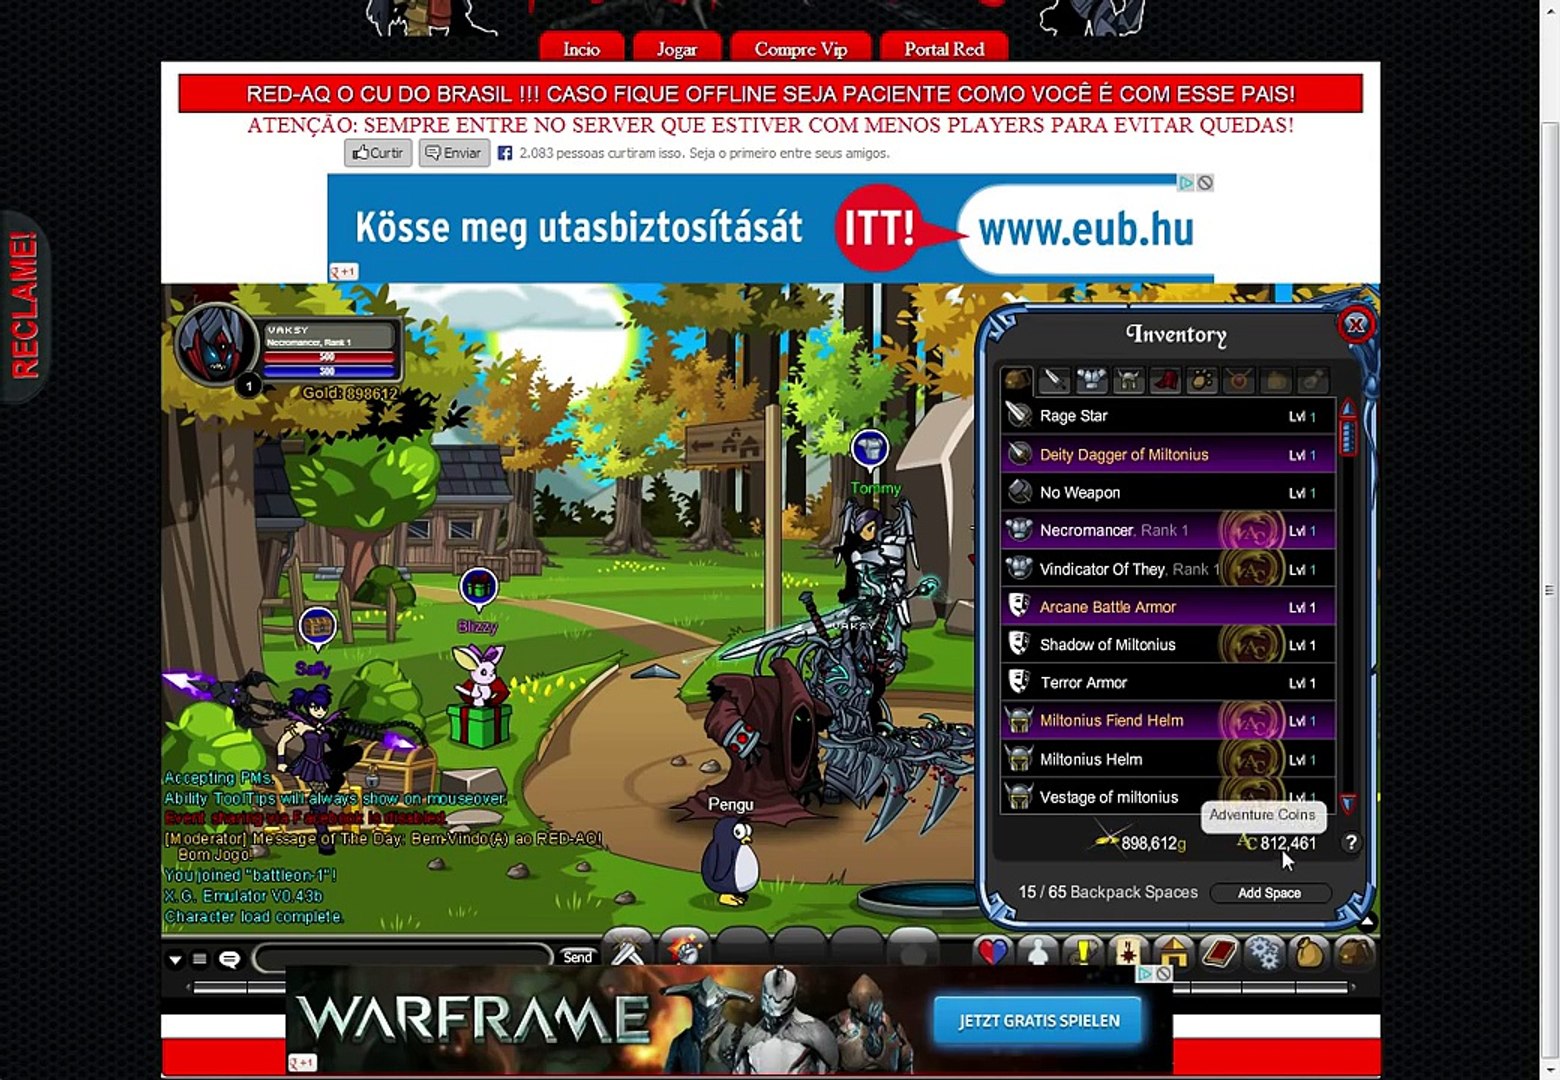 aqw private-server ac hack: :D - video Dailymotion